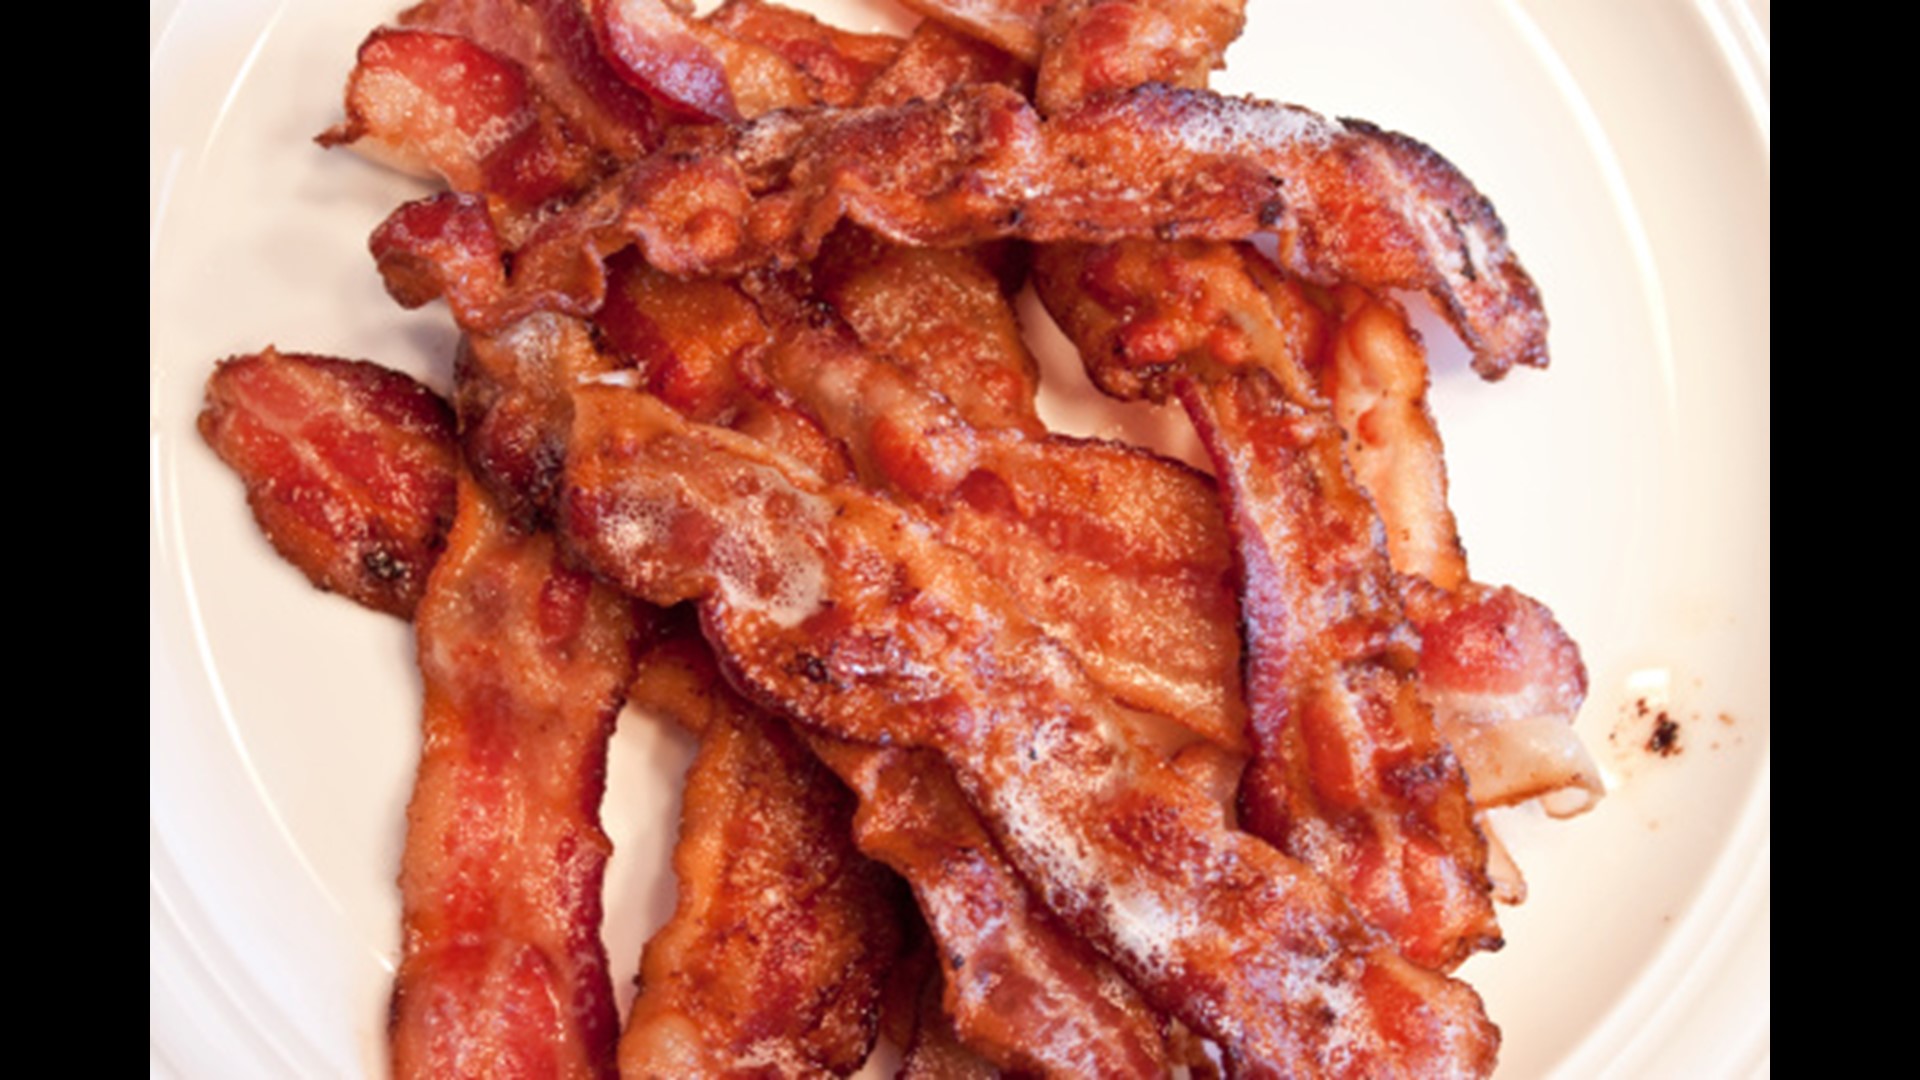 Bacon linked to migraines